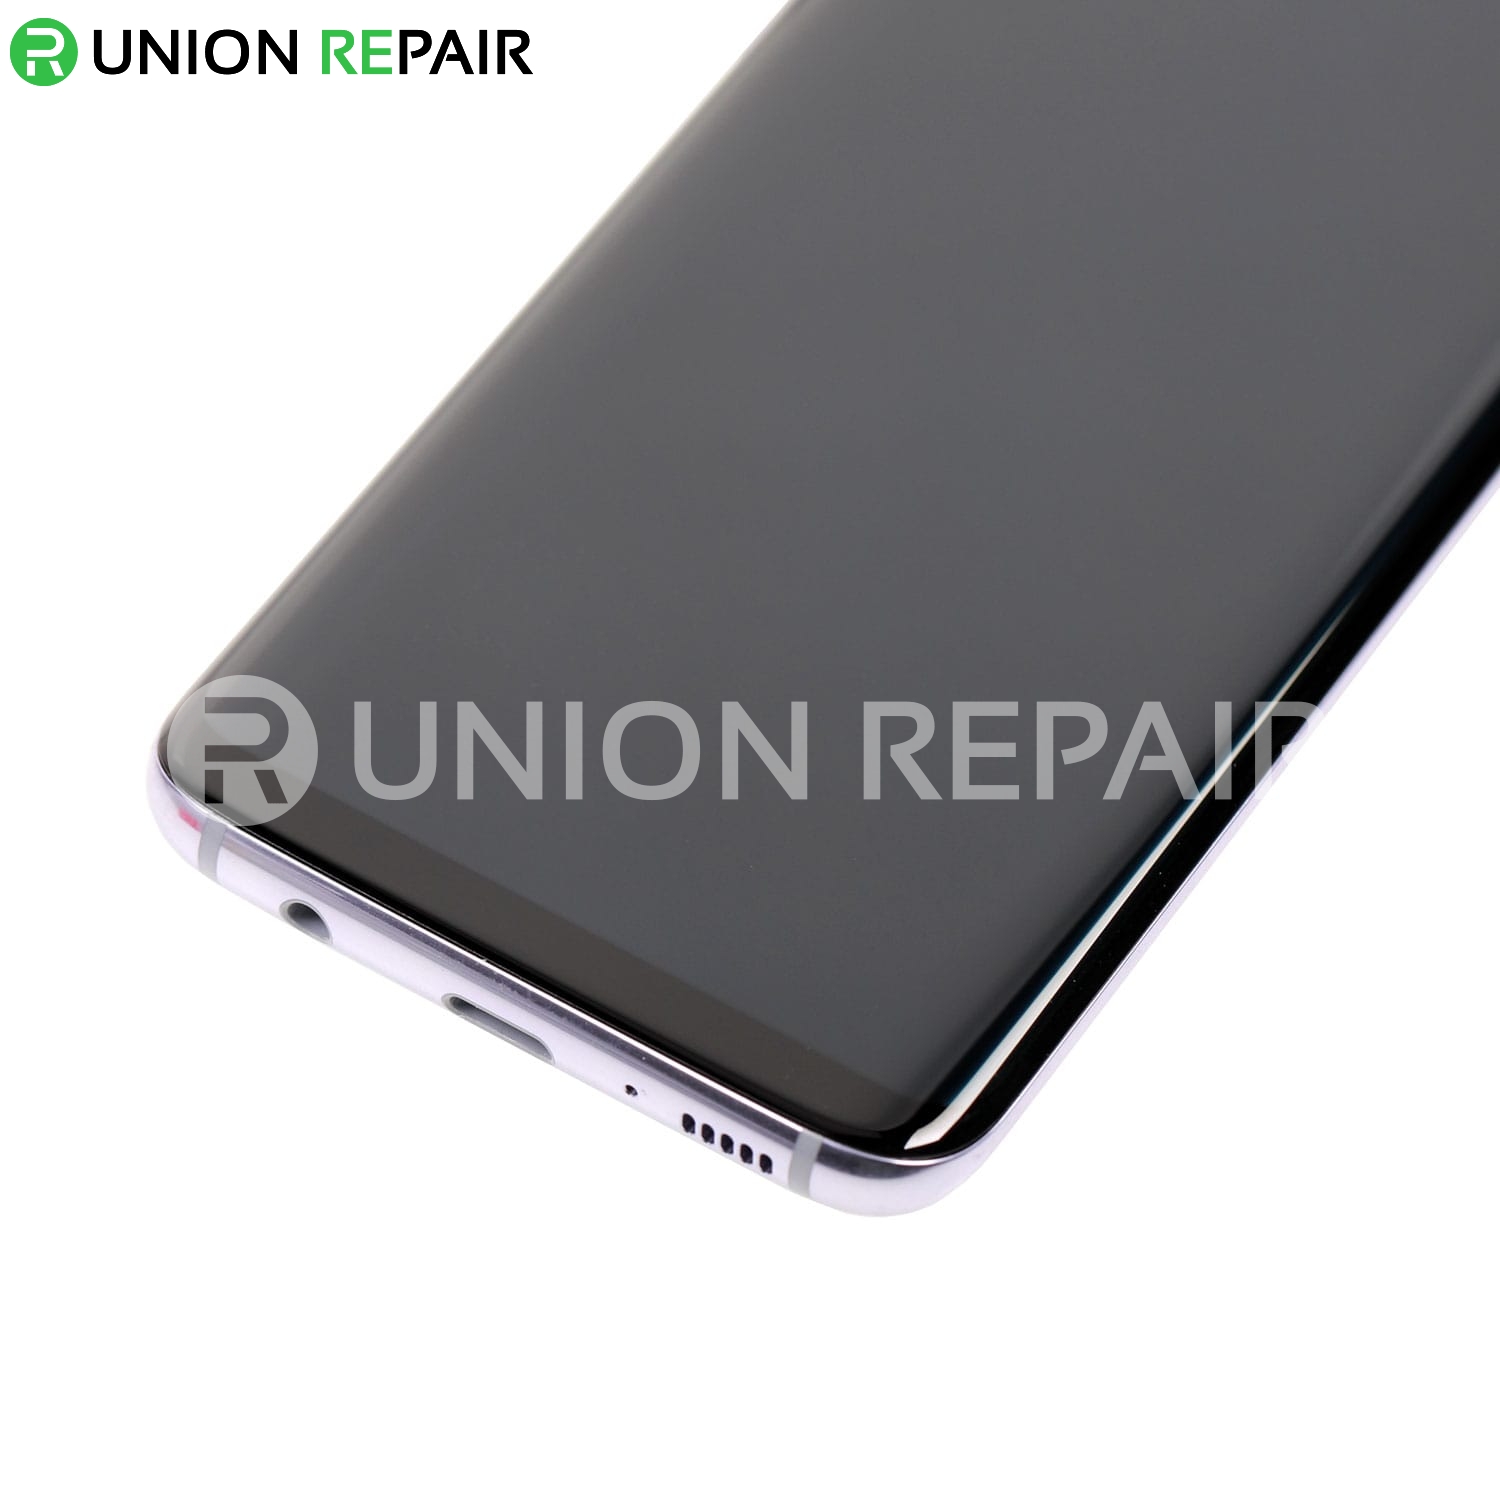 Replacement for Samsung Galaxy S8 SM-G950 LCD Screen Assembly with Frame - Silver